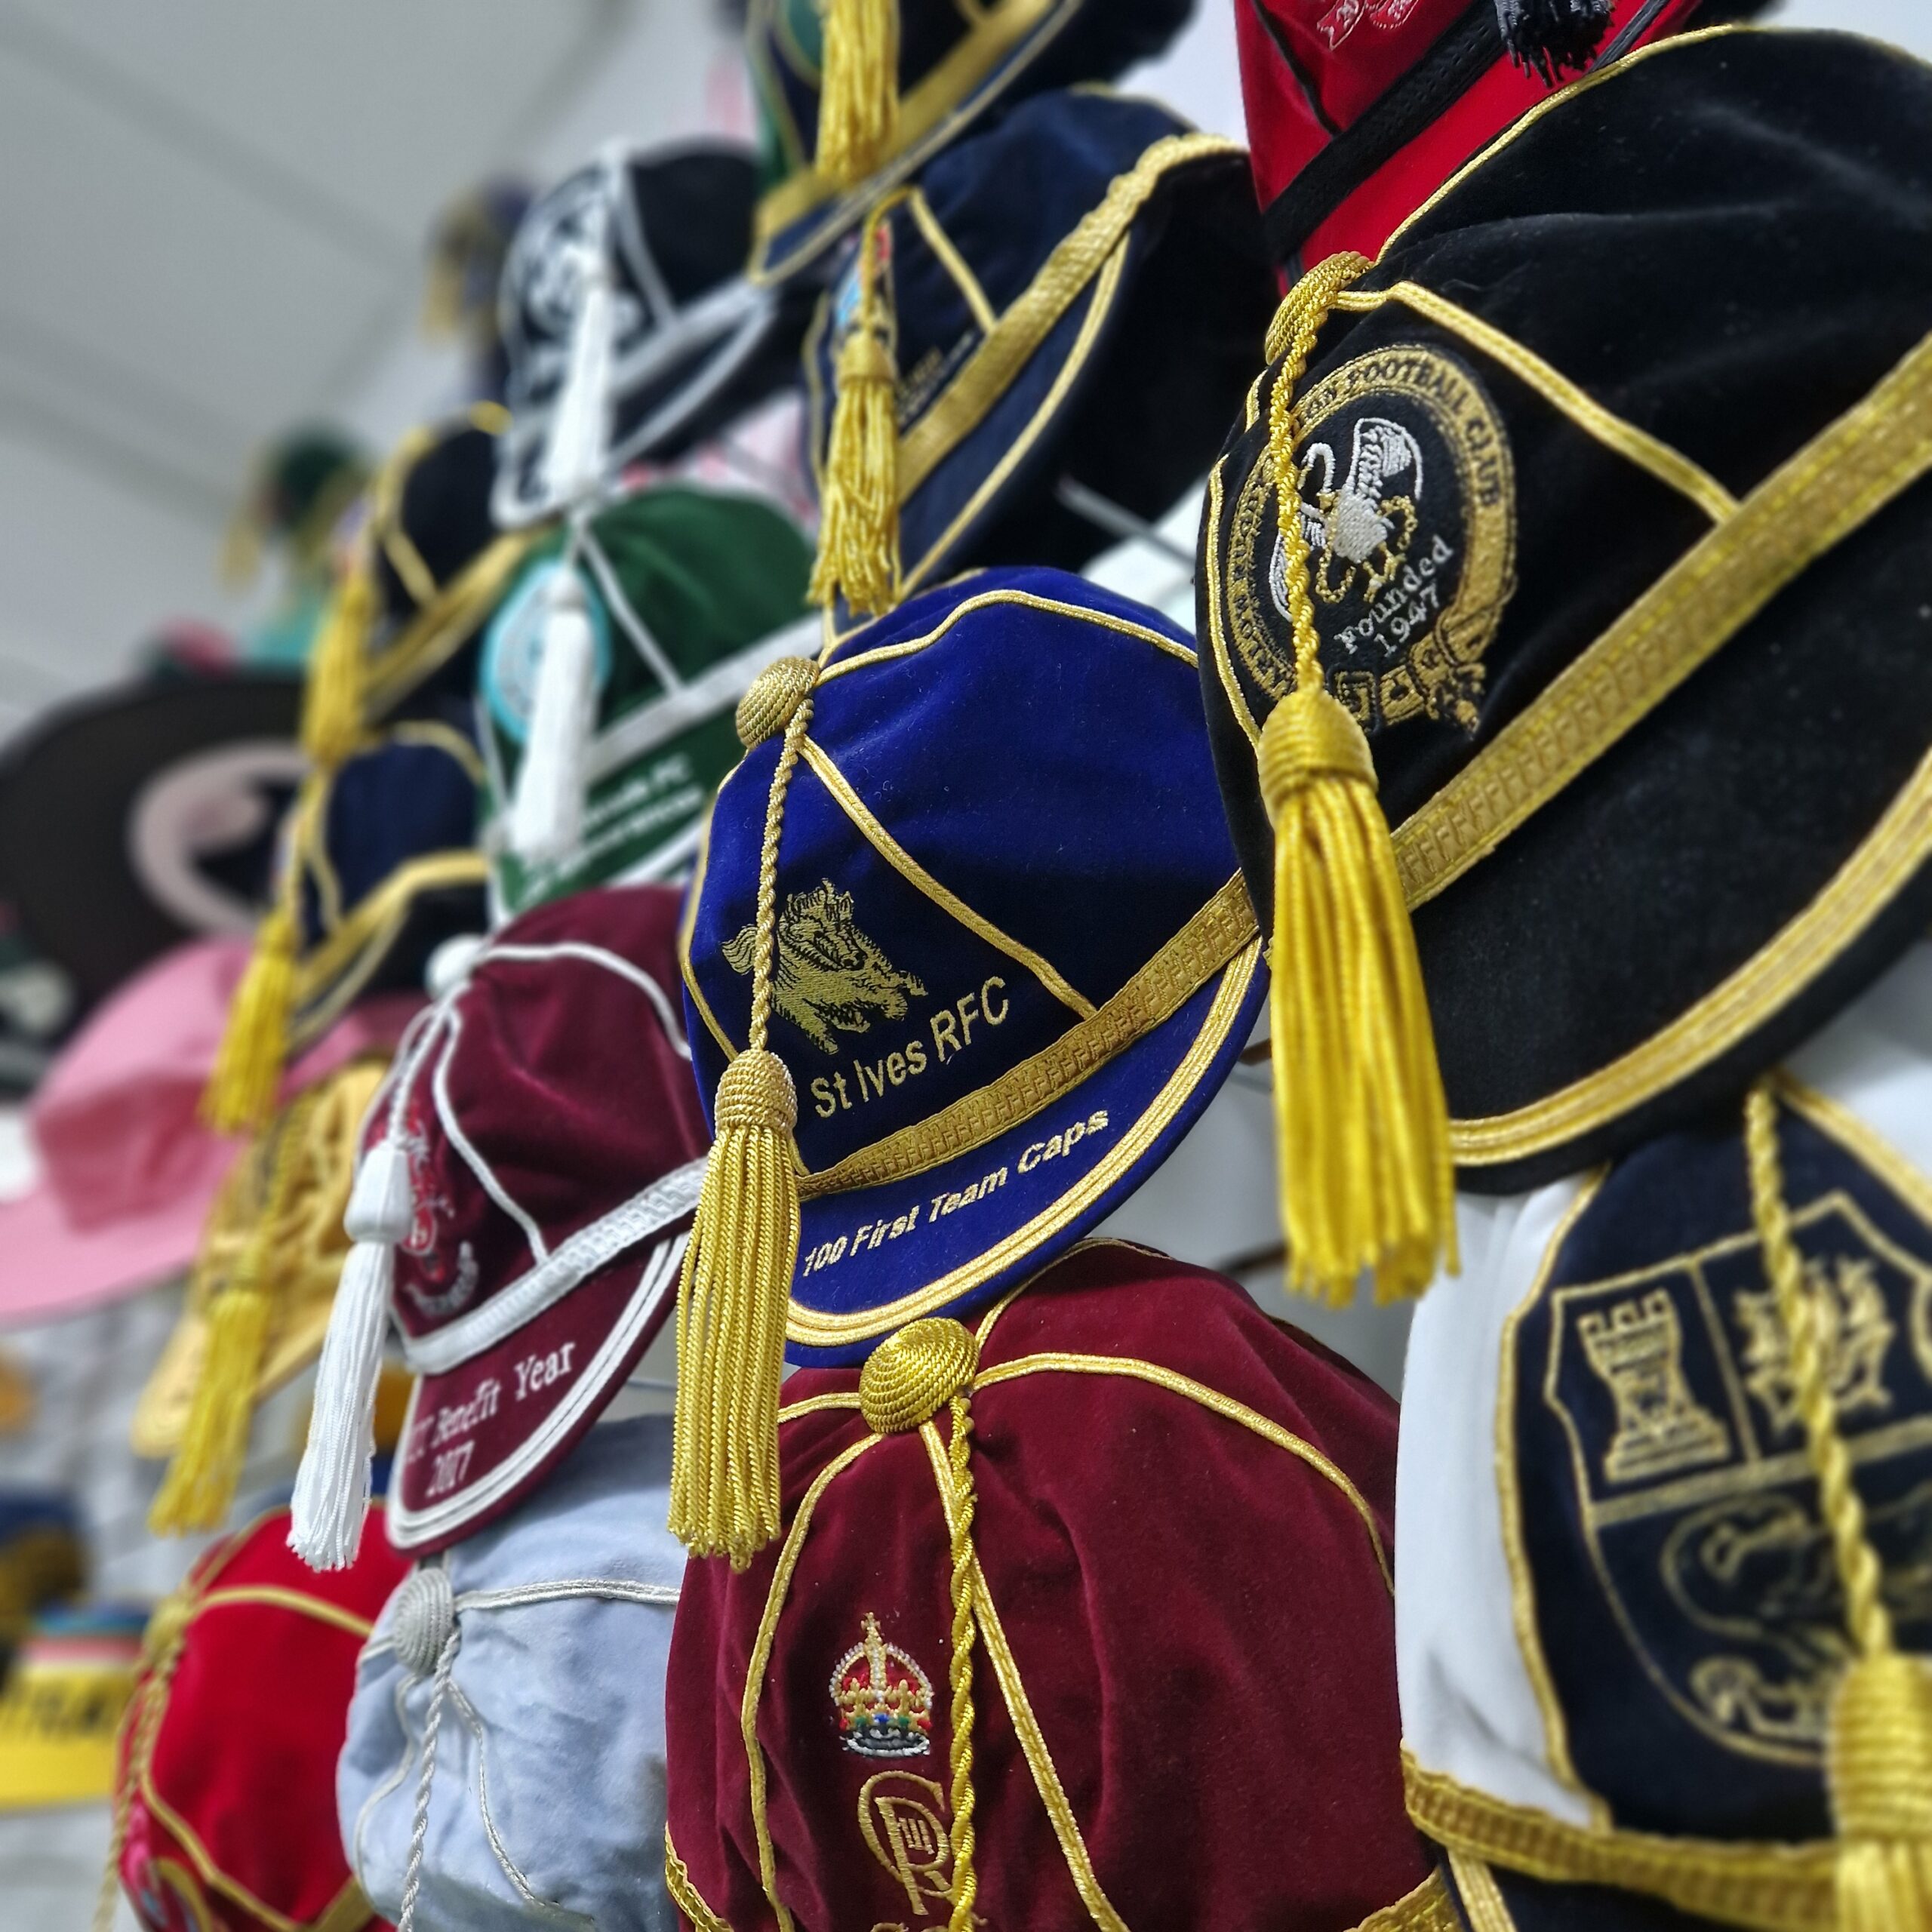 Honour Cap with tassles hanging off the wall with different embroidery and logos.